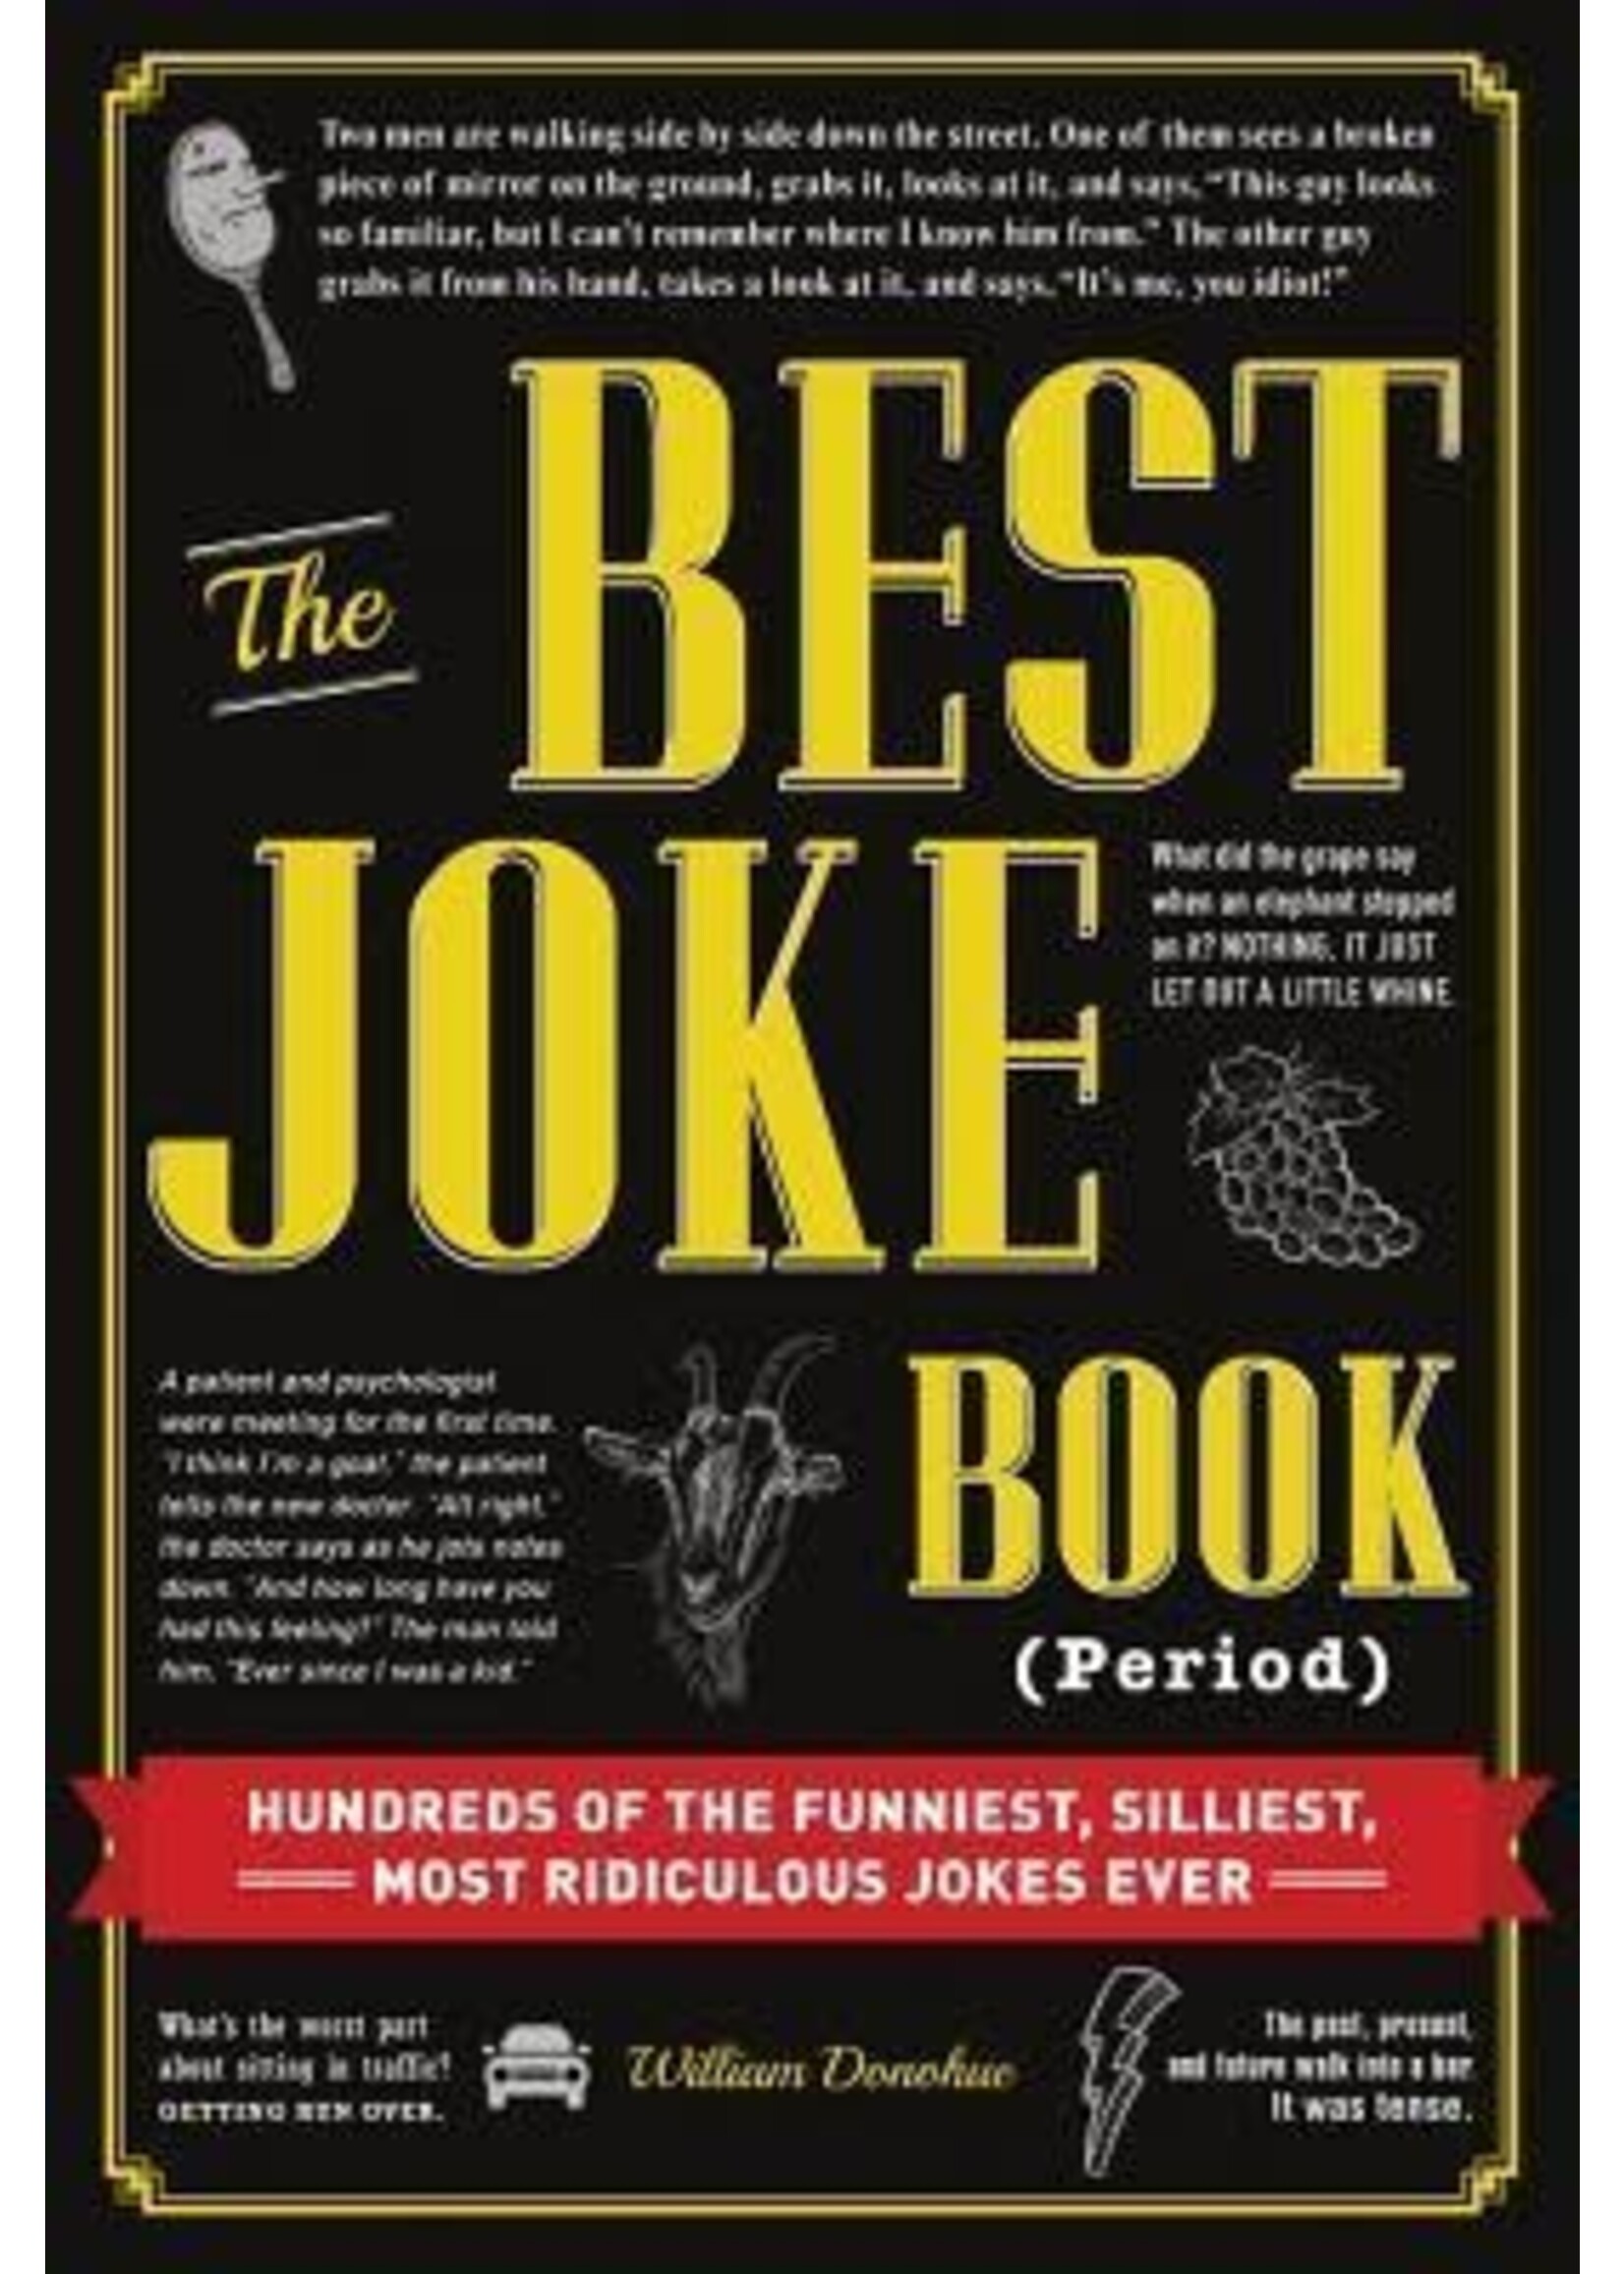 The Best Joke Book (Period): Hundreds of the Funniest, Silliest, Most Ridiculous Jokes Ever by William Donohue